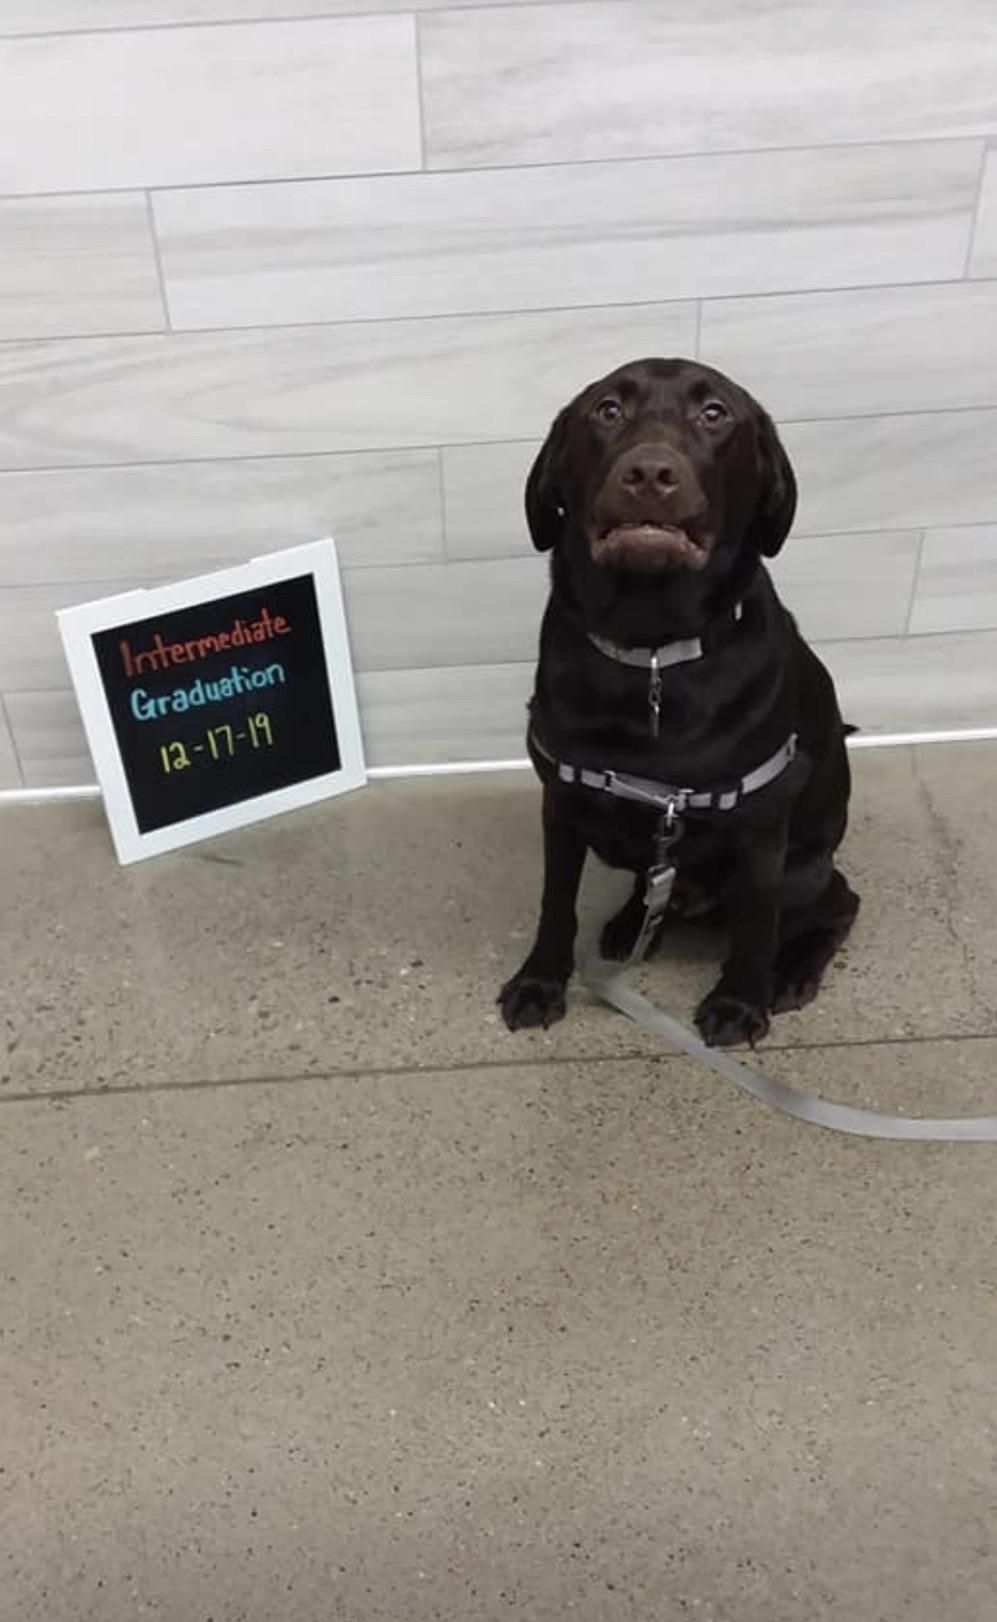 A picture my sister sent me of a dog that graduated from the training classes at her work. This is his excited face :)